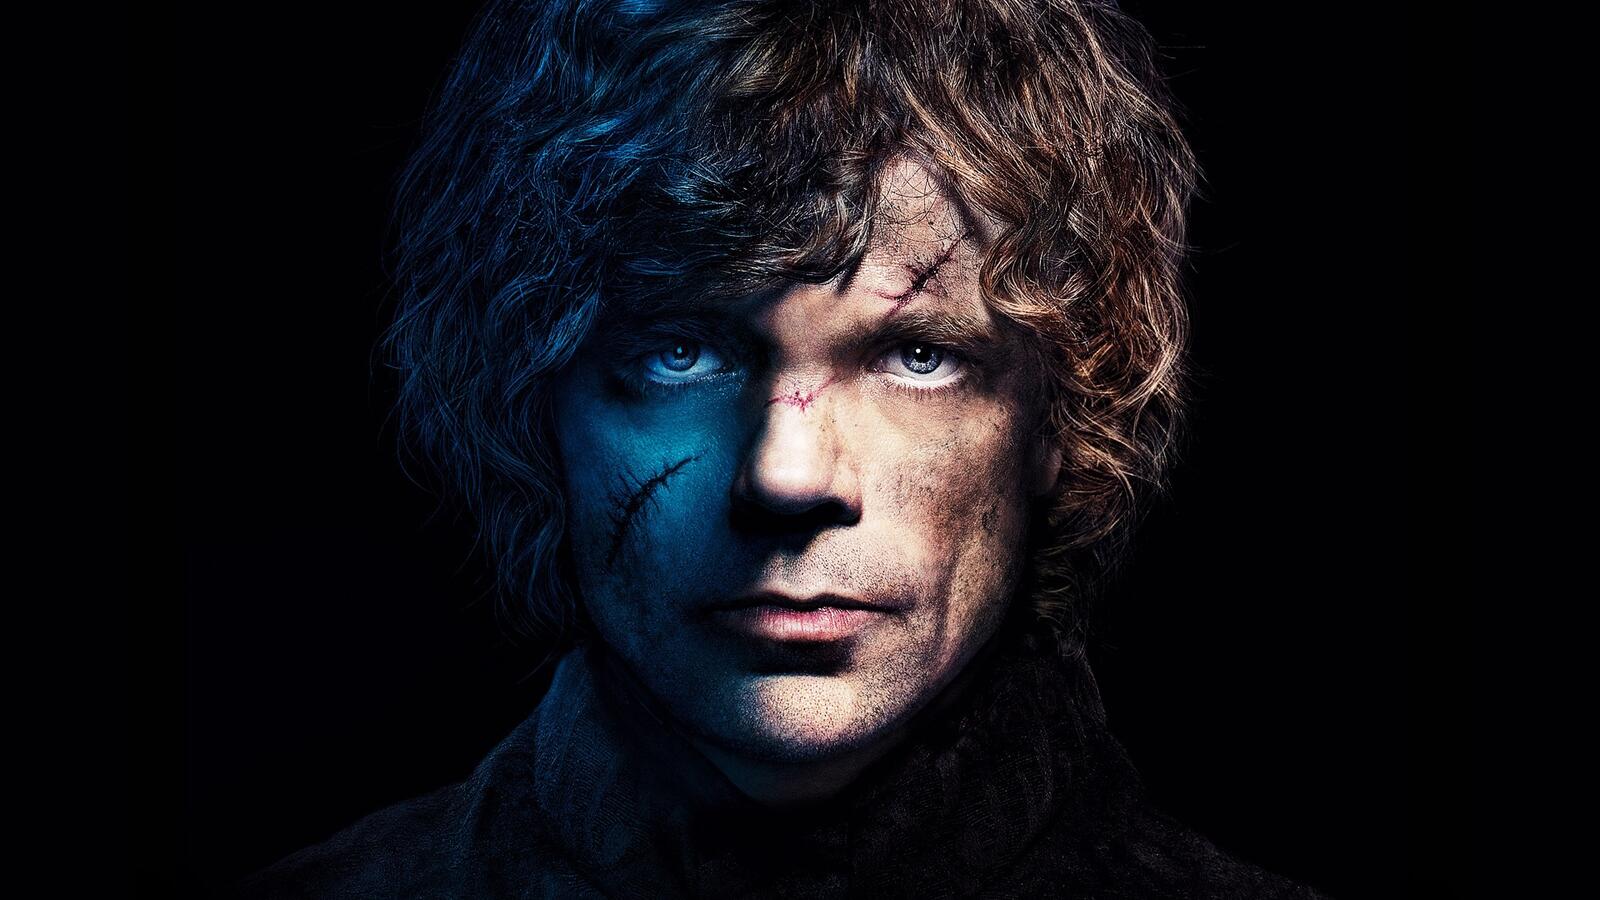 Wallpapers movies TV show Tyrion Lannister on the desktop